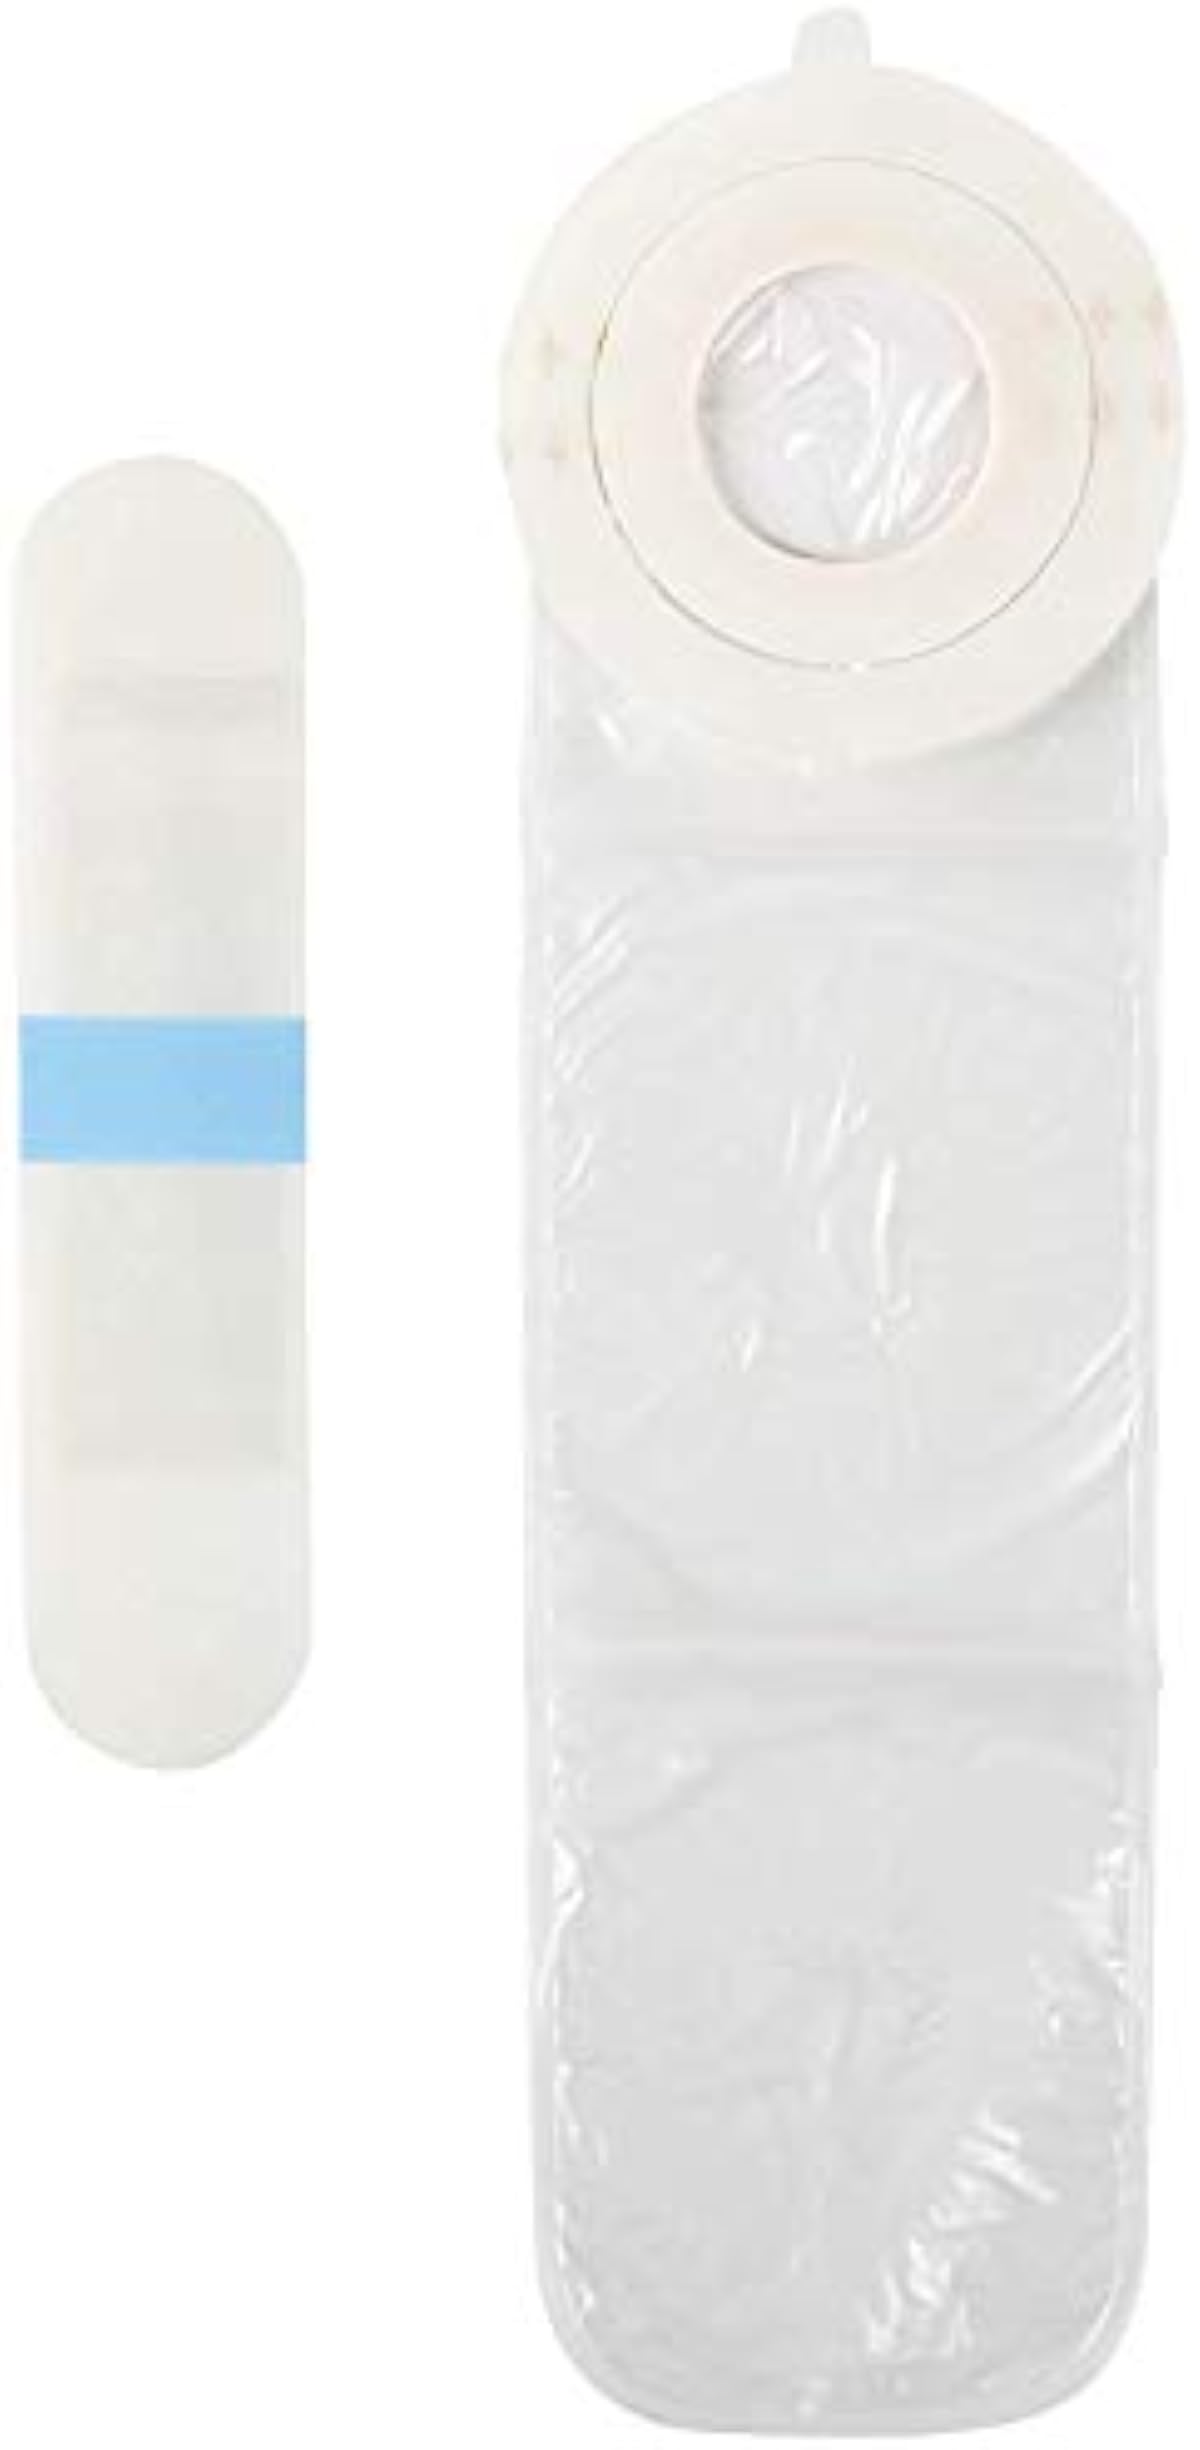 Cath Dry Dialysis Catheter Medical Dressing & Moisture Barrier (Pack of 12 = 1 Month Supply) - Prevents Catheter Infections - Waterproof & Acts as Shower Shield